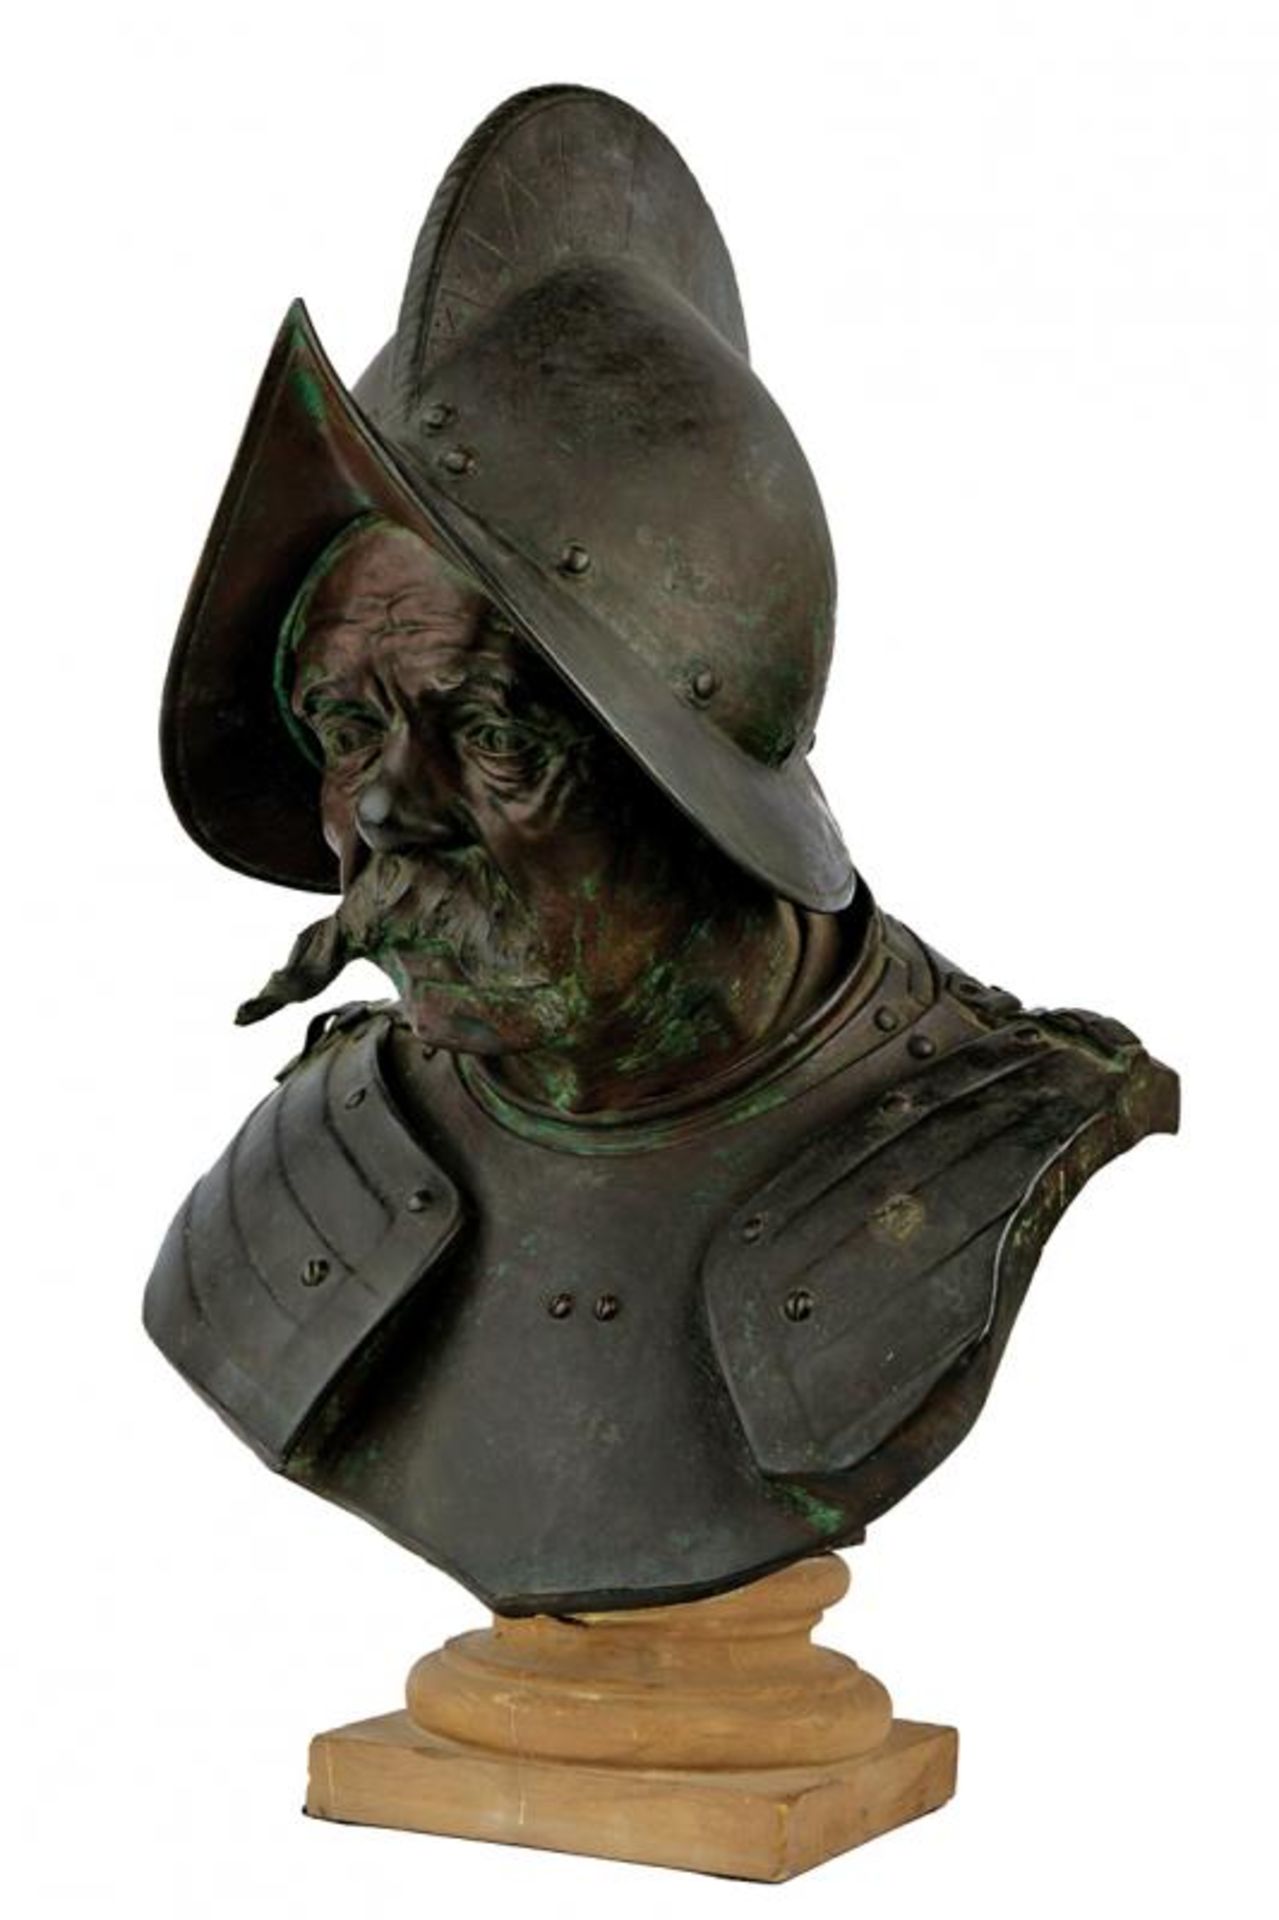 A man-at-arms bust